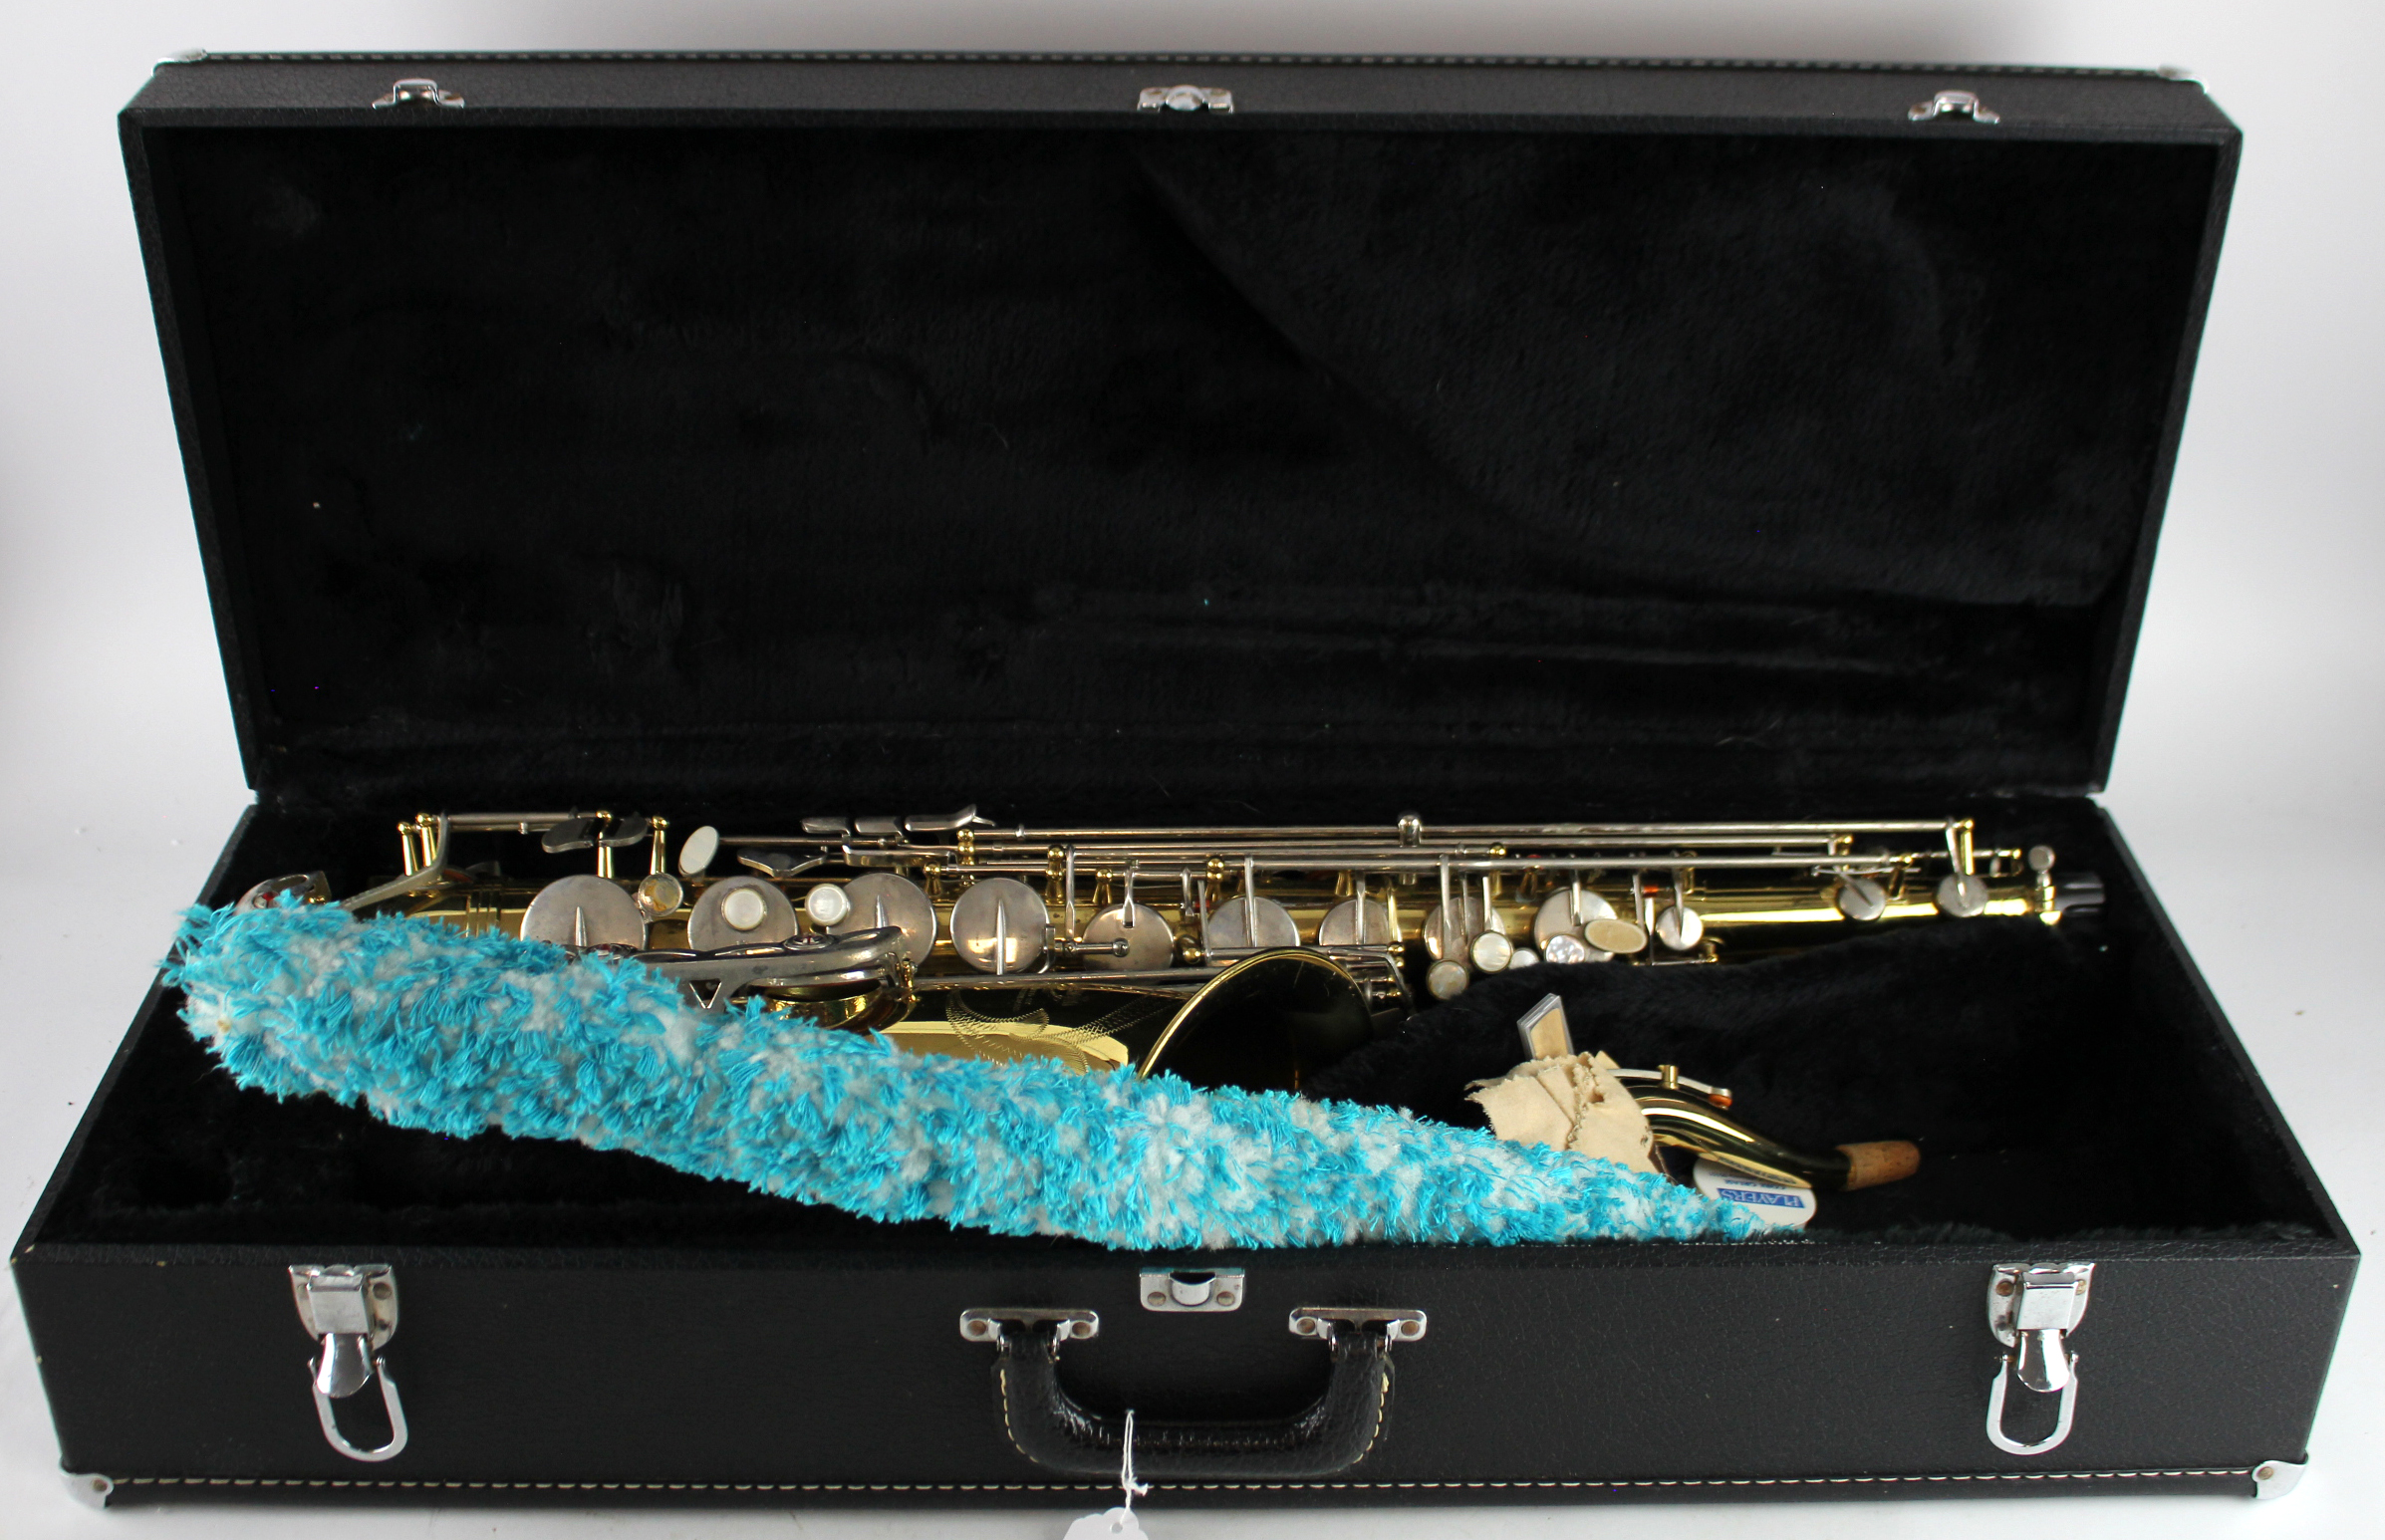 Earlham saxophone (no. H1991636), neck piece present, contained in a fitted case